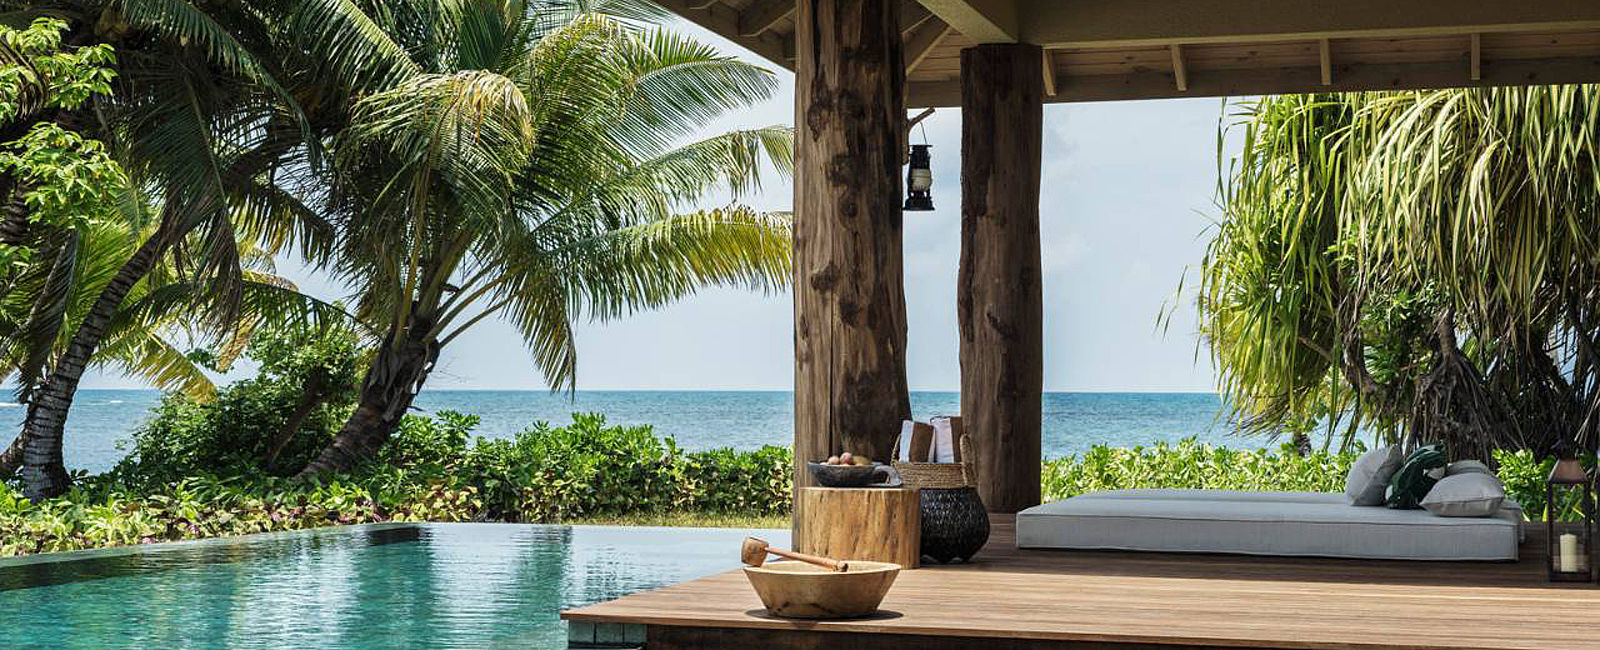 HOTEL ANGEBOTE
 Four Seasons Desroches: Twice the Paradise 
